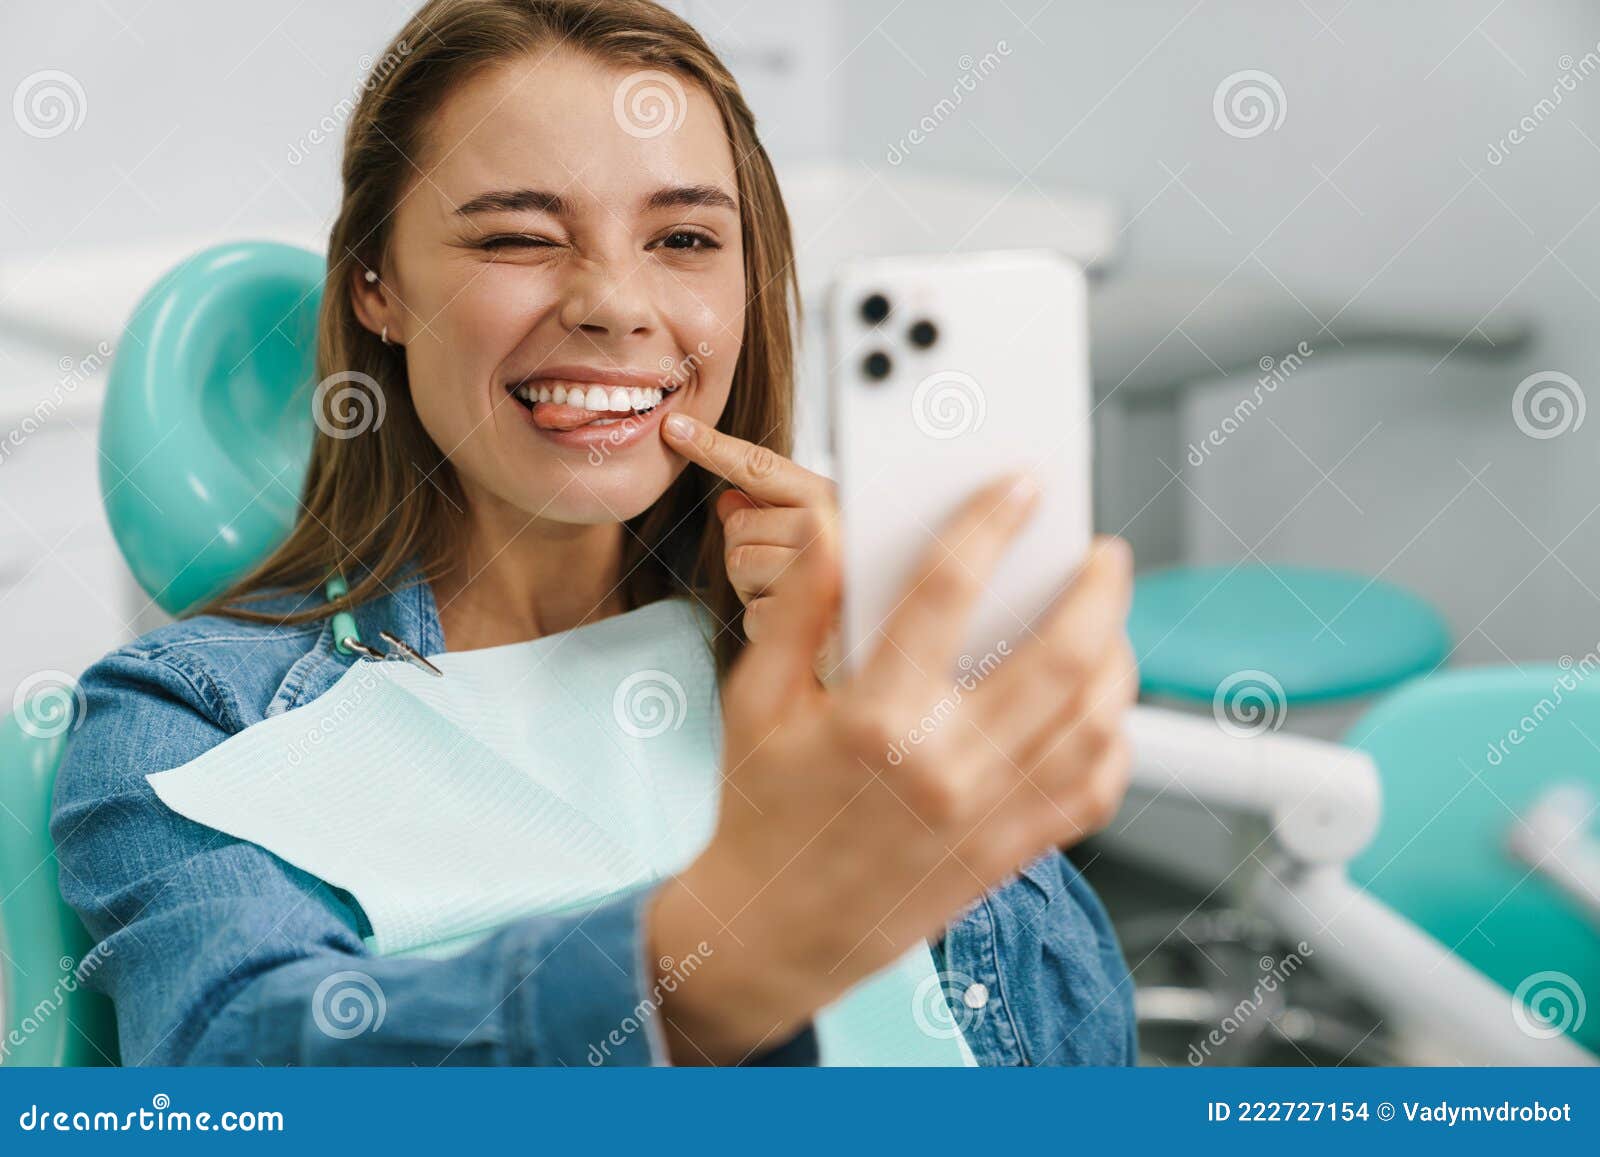 European Young Woman Showing Her Tongue While Taking Selfie On